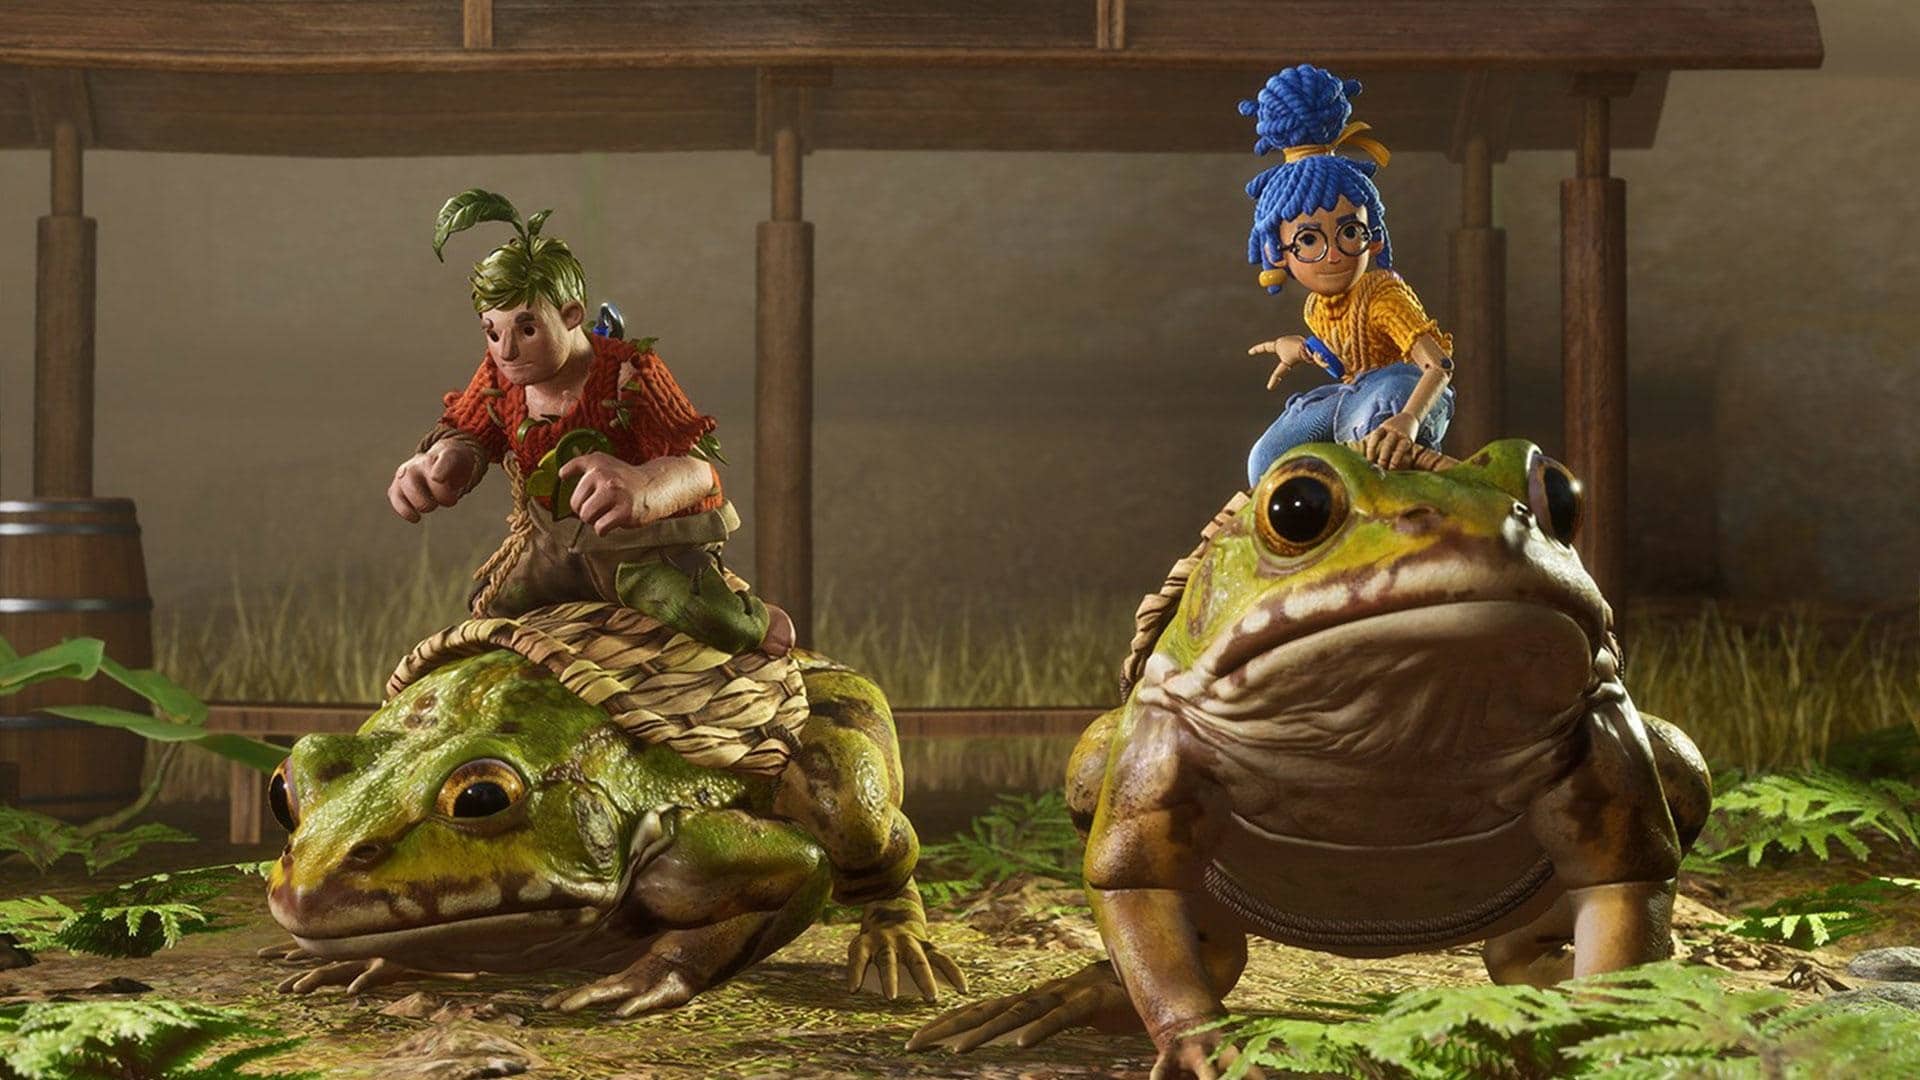 (Will Dwayne The Rock Johnson soon be sitting on the frog? Current rumours say so, at least.)